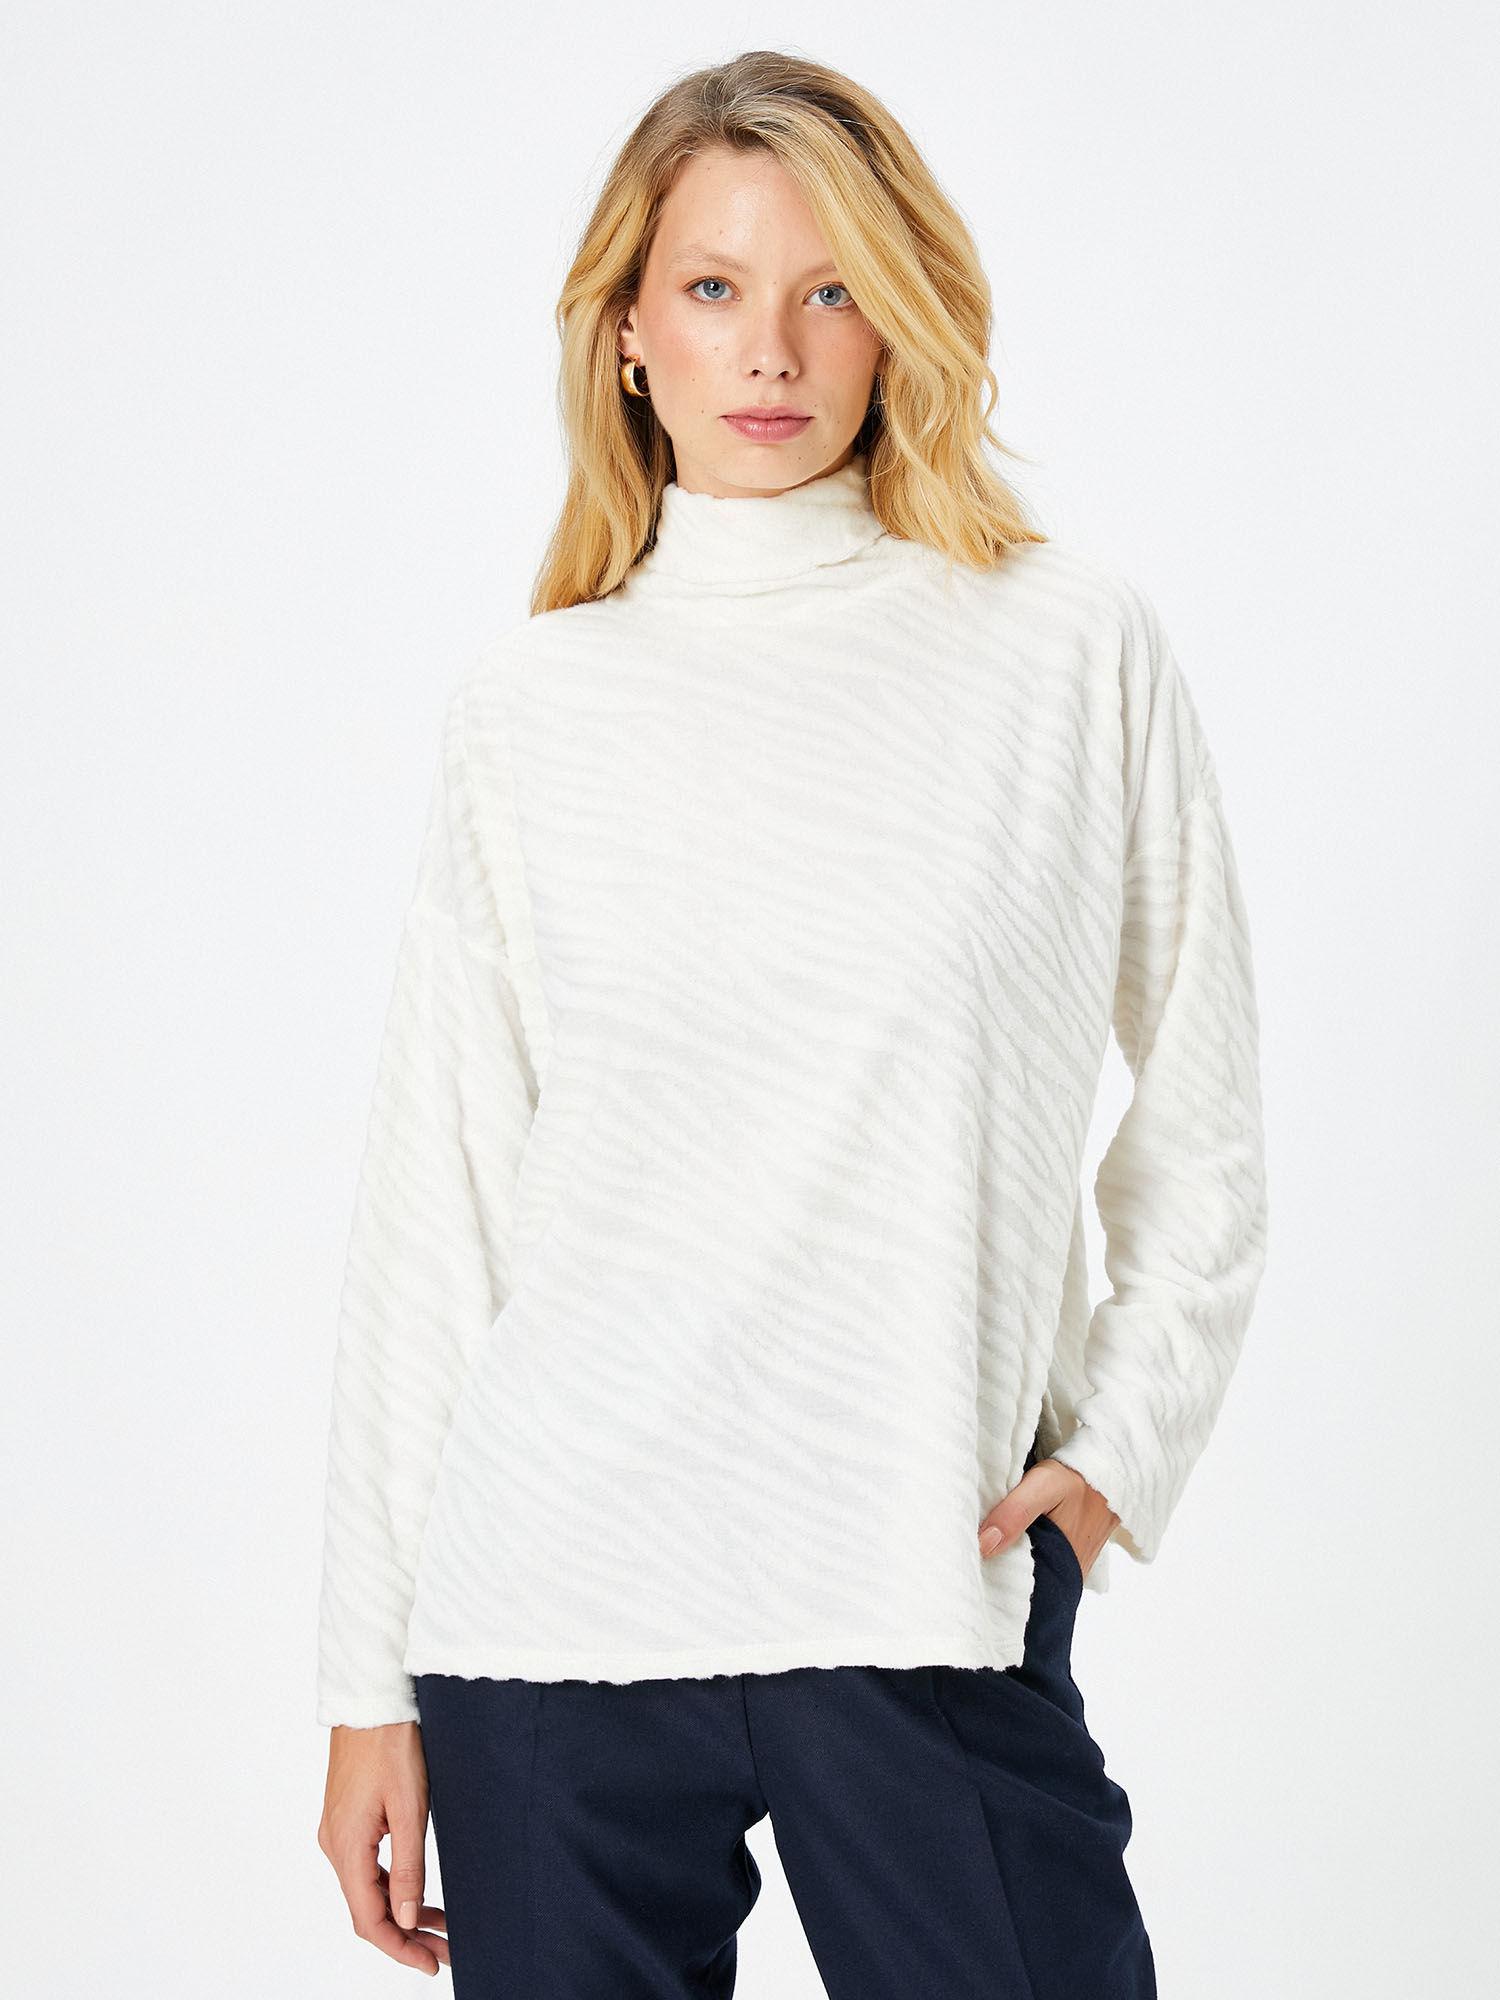 casual everyday sweater for women